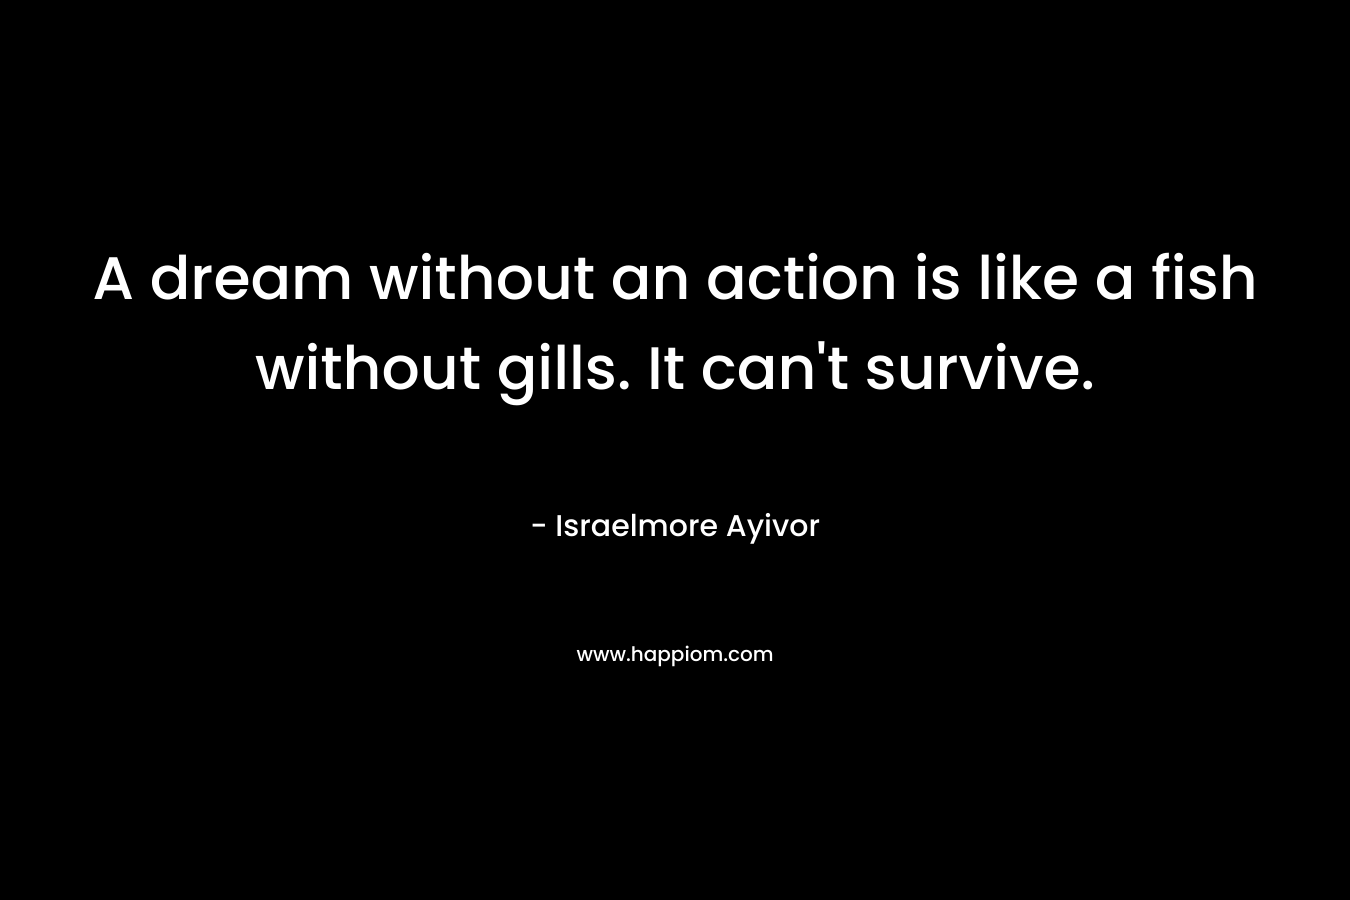 A dream without an action is like a fish without gills. It can't survive.